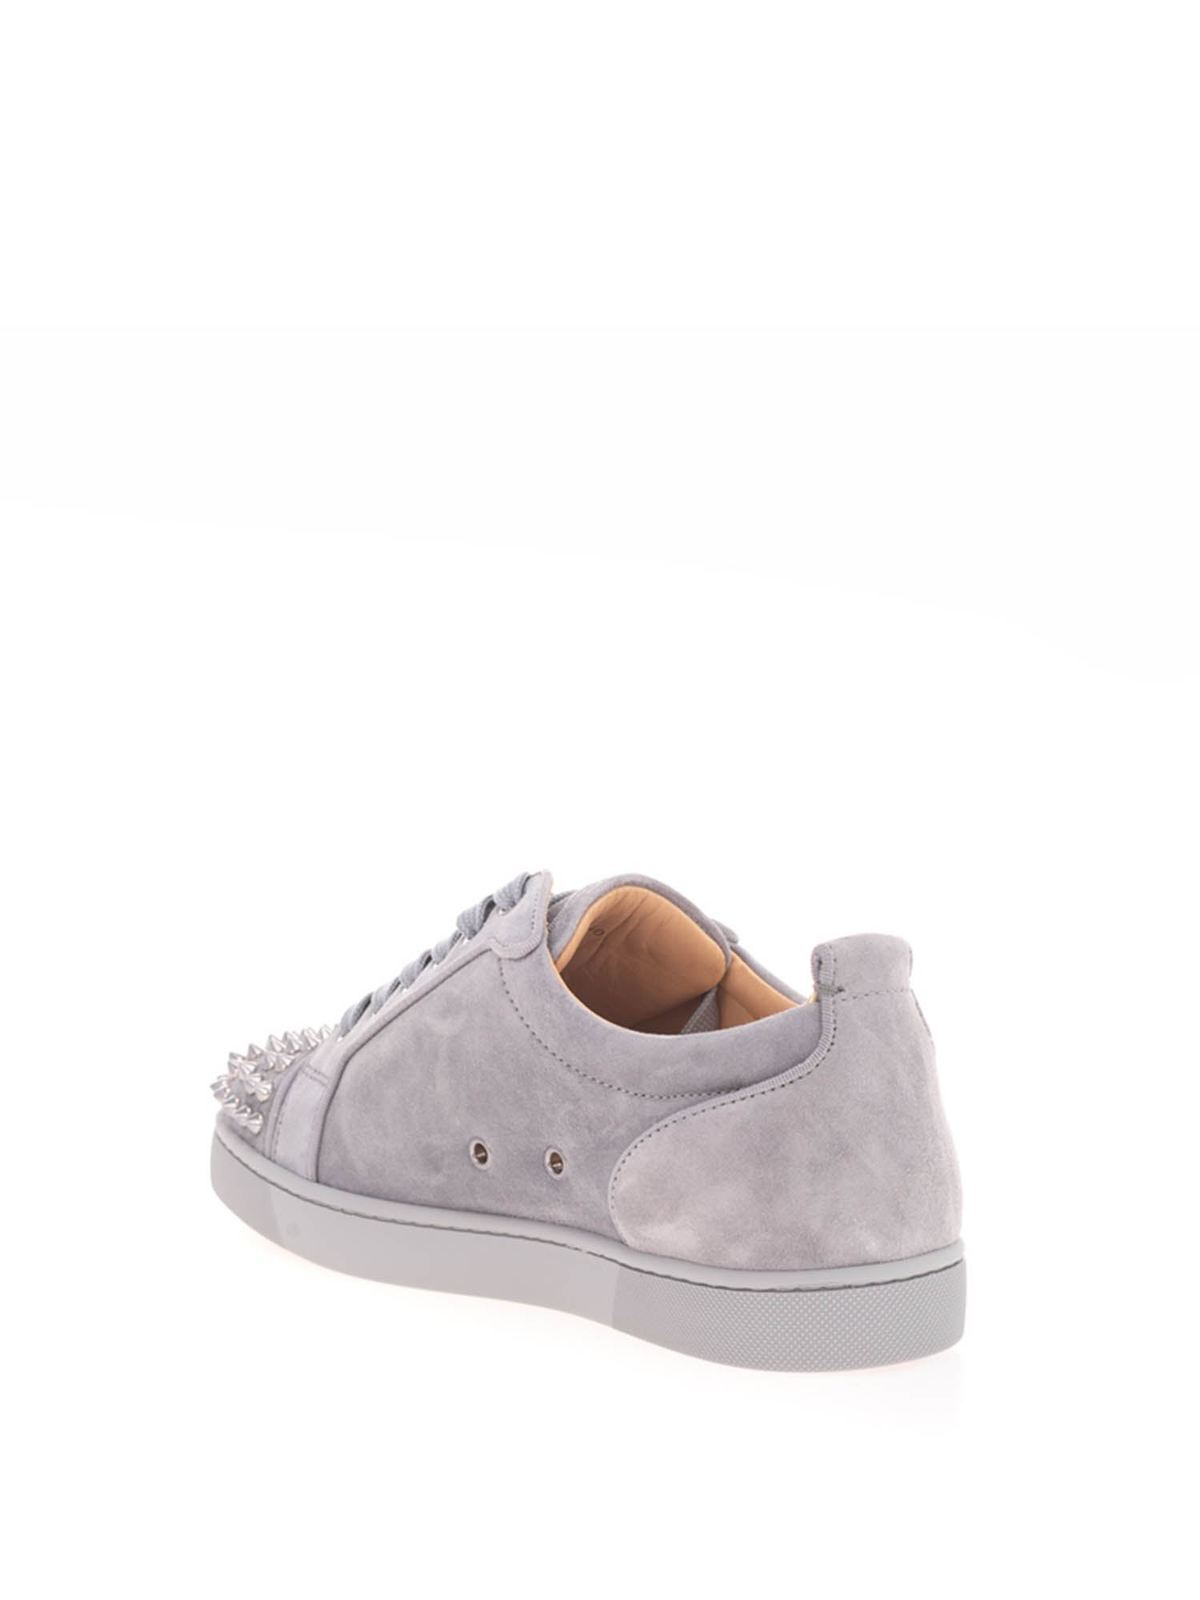 Christian Louboutin Grey Suede Louis Orlato Junior Spikes Sneakers